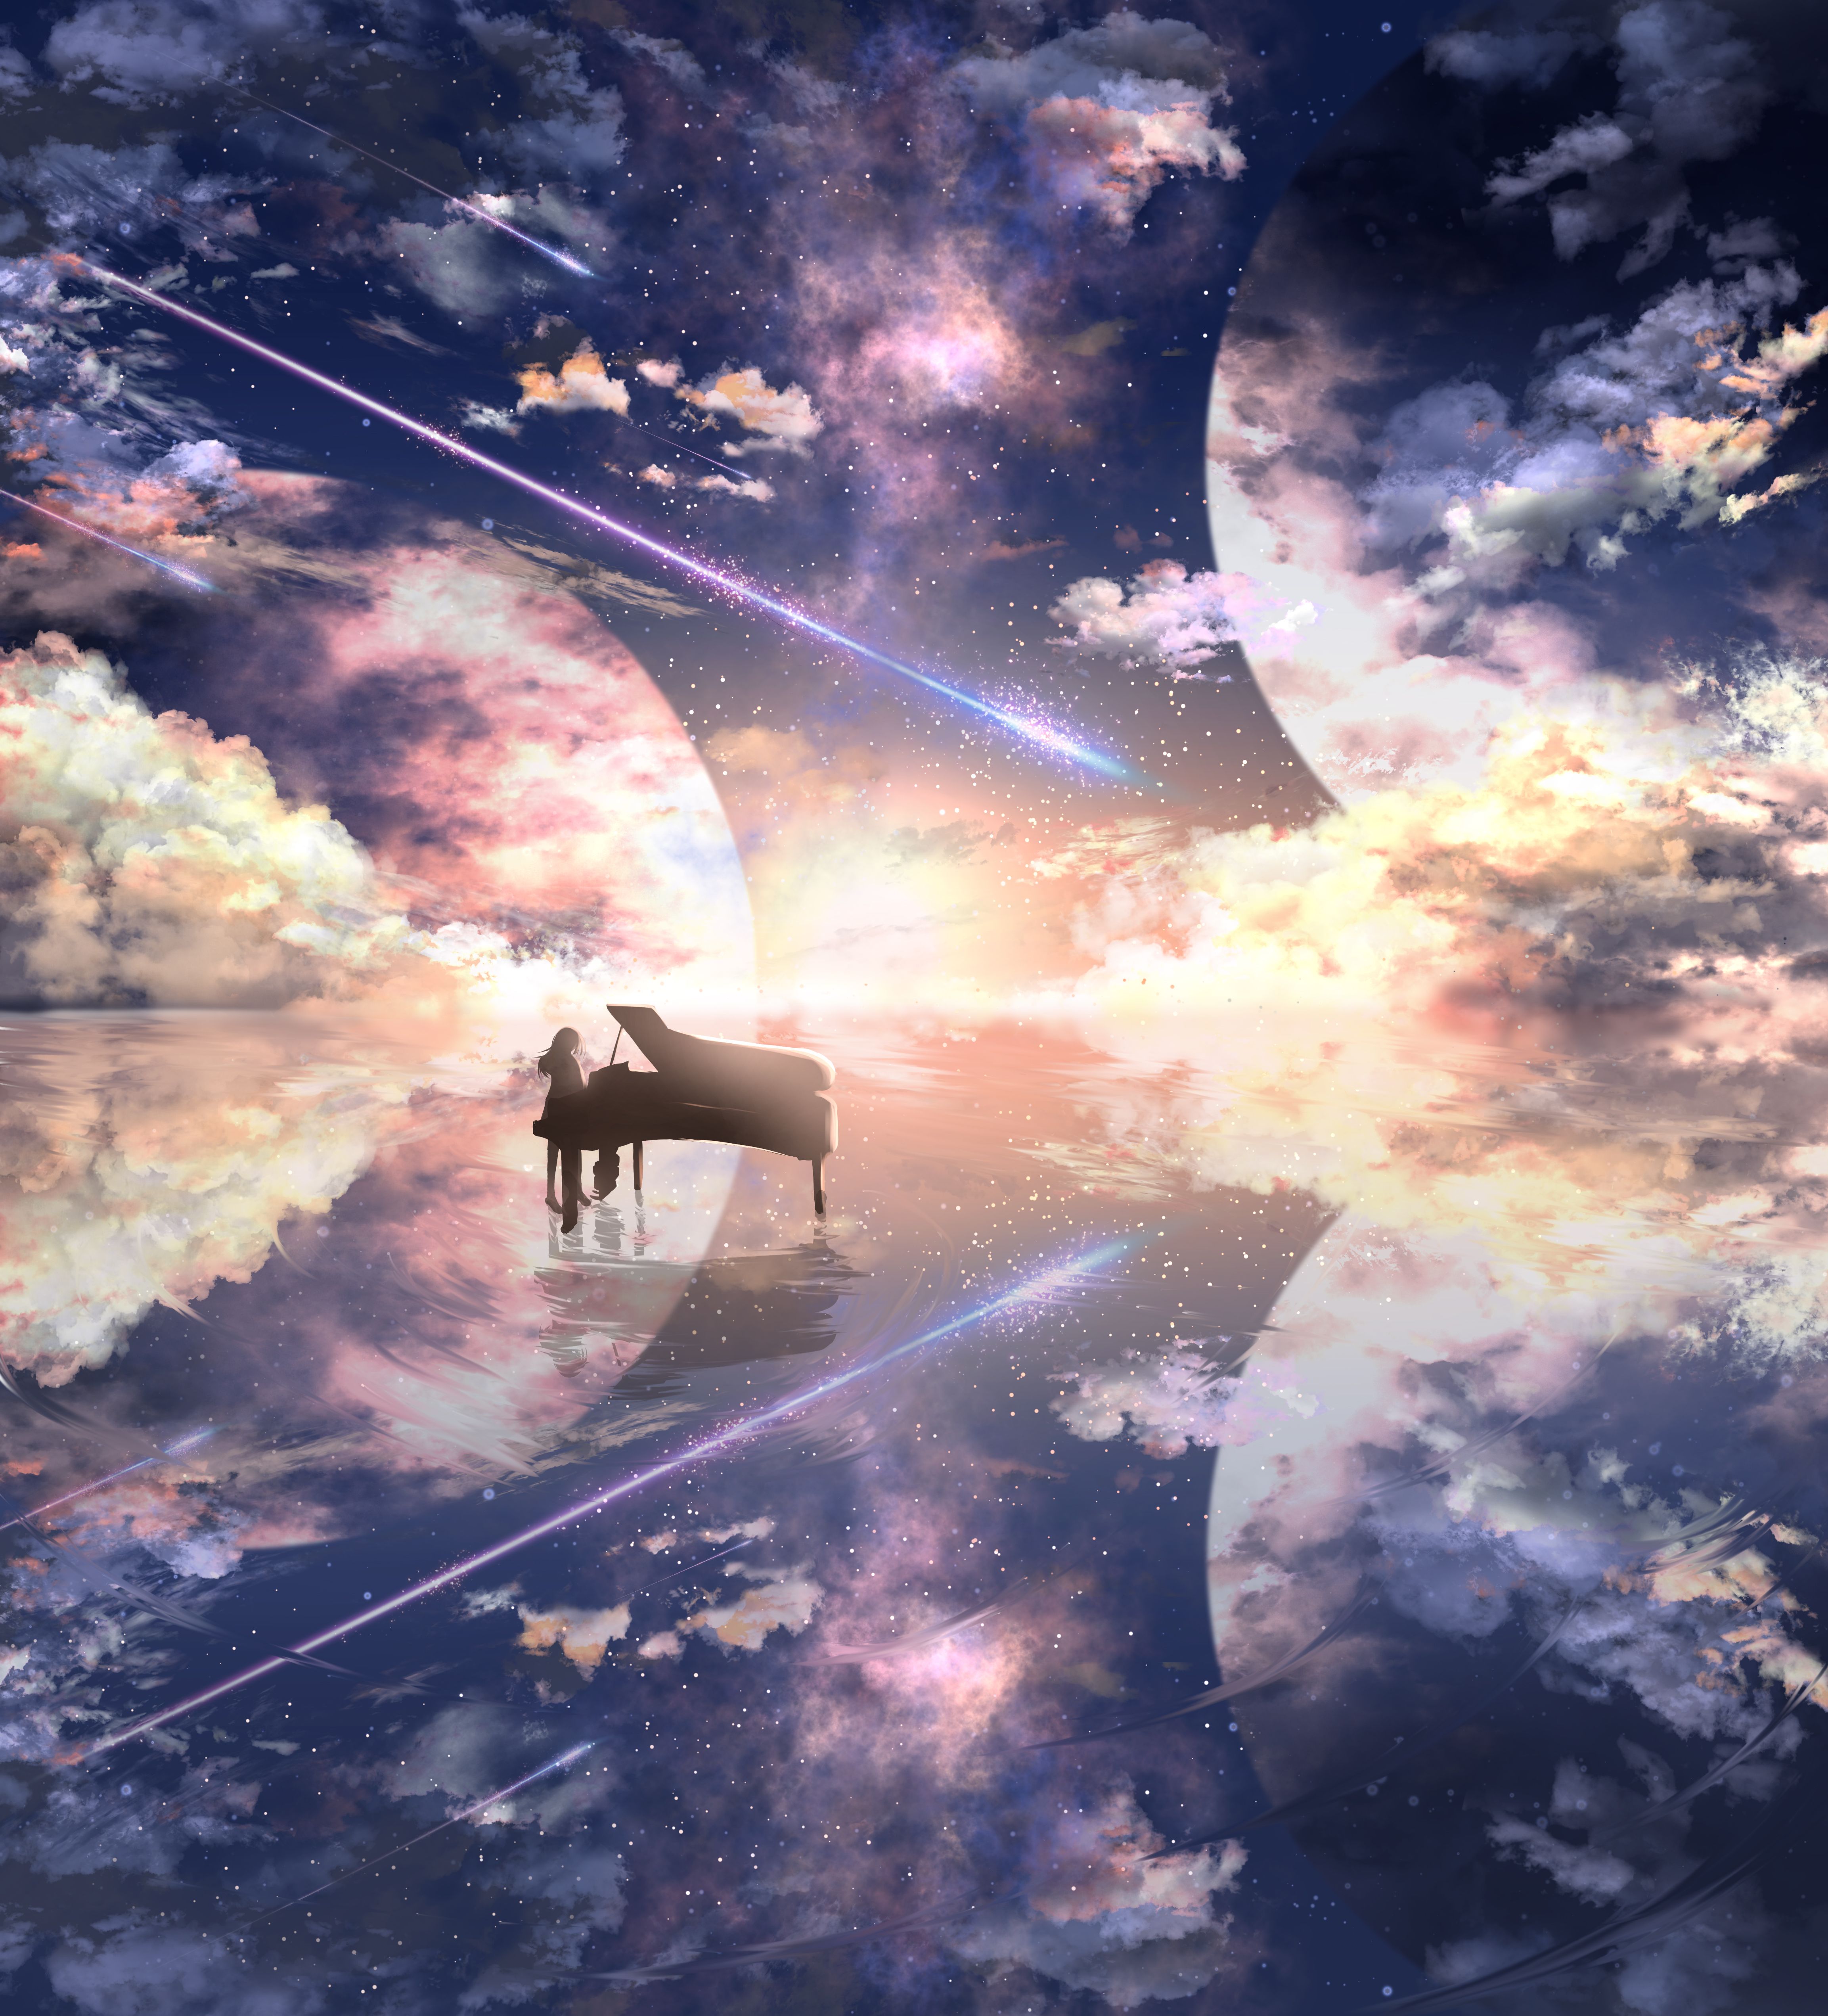 4611x5084 Download wallpaper 4611x5084 piano, silhouette, space, illusion, anime HD background on WallpaperBat